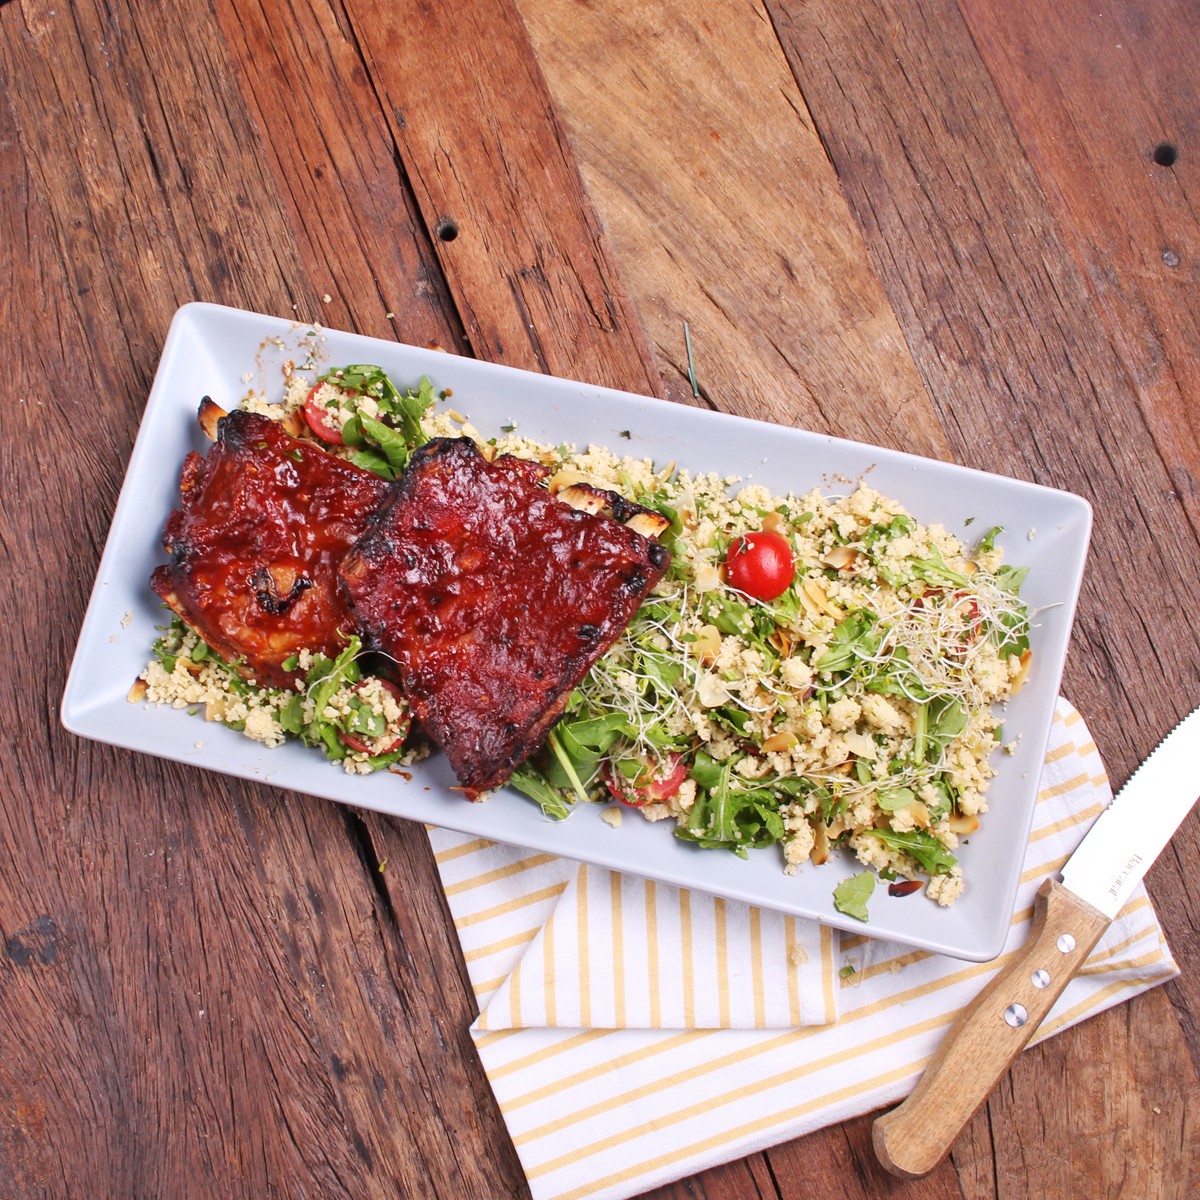 Sweet And Spicy BBQ Pork Ribs With Herbed Cous Cous - Three Aussie Farmers Sweet and Spicy BBQ Pork Ribs